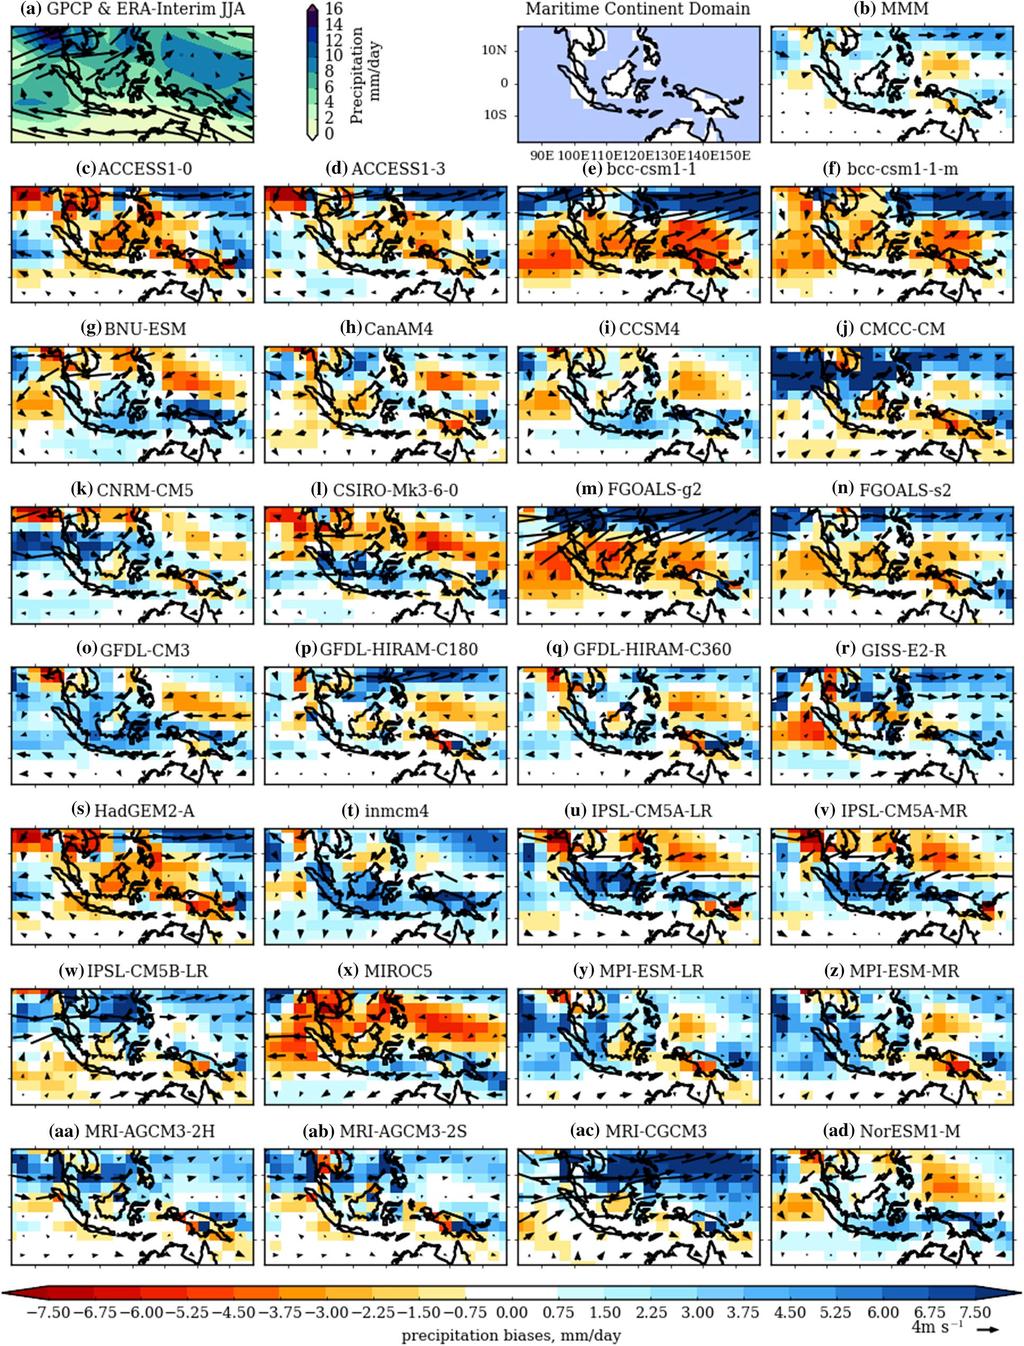 Maritime Continent seasonal climate biases in AMIP experiments of the CMIP5 multimodel ensemble Fig.